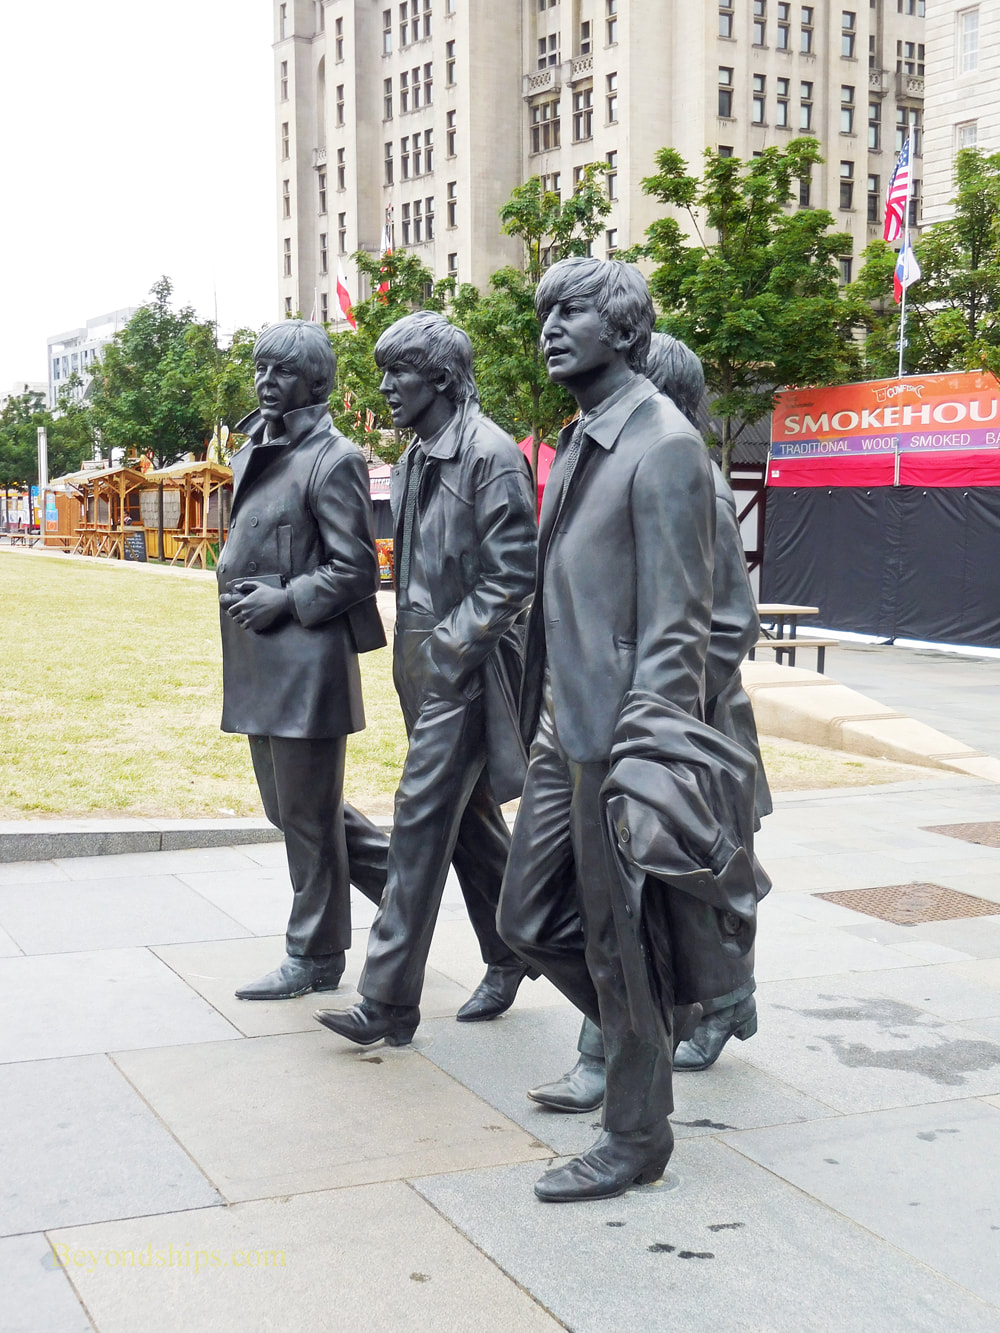 Statue of the Beatles, Liverpool England